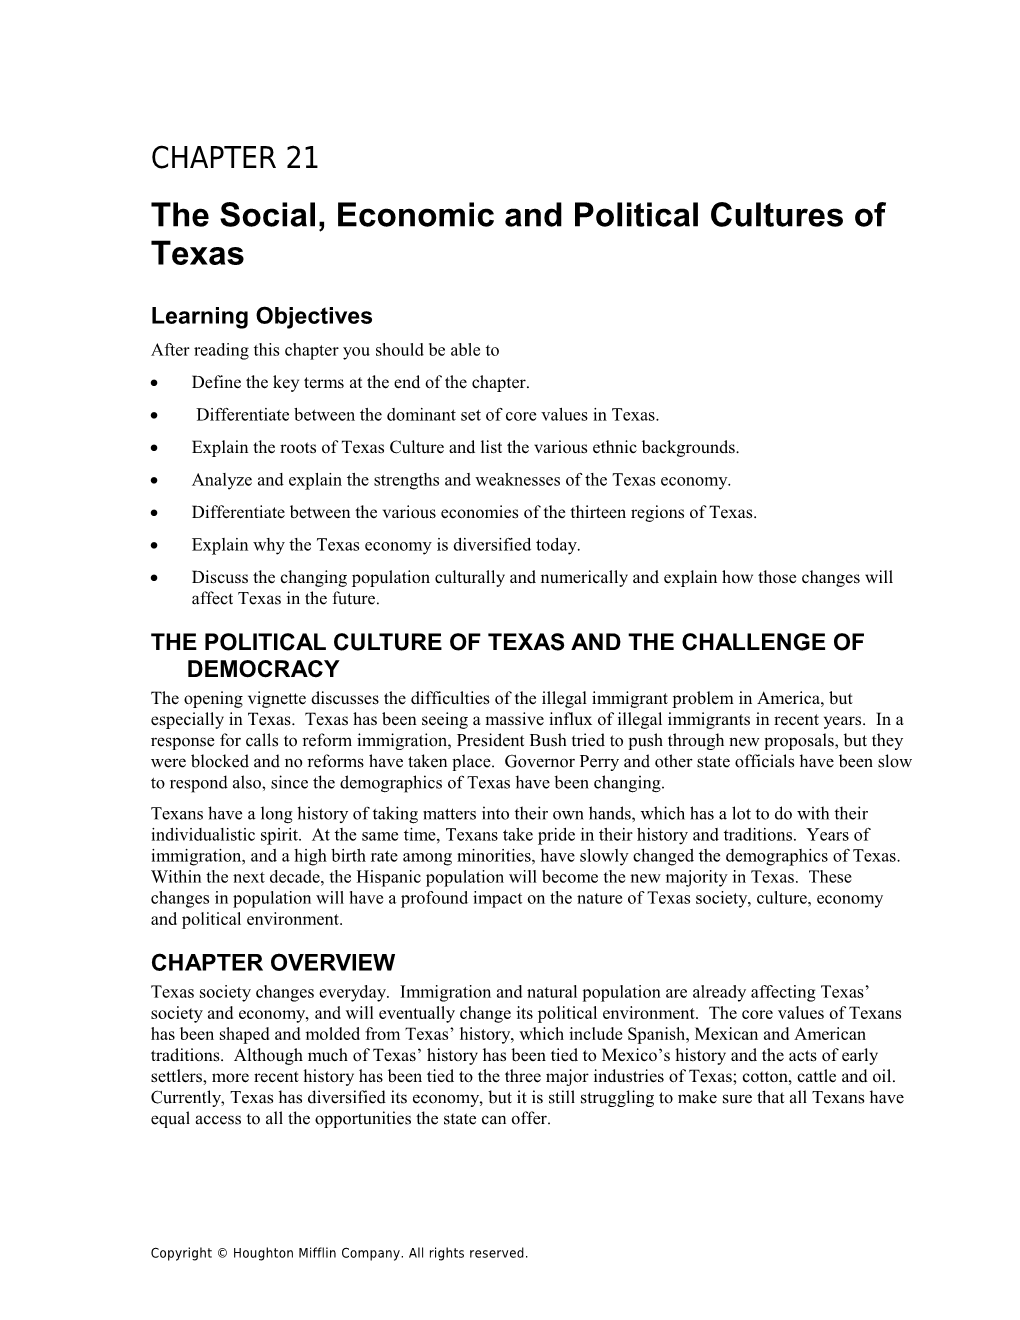 The Social, Economic and Political Cultures of Texas